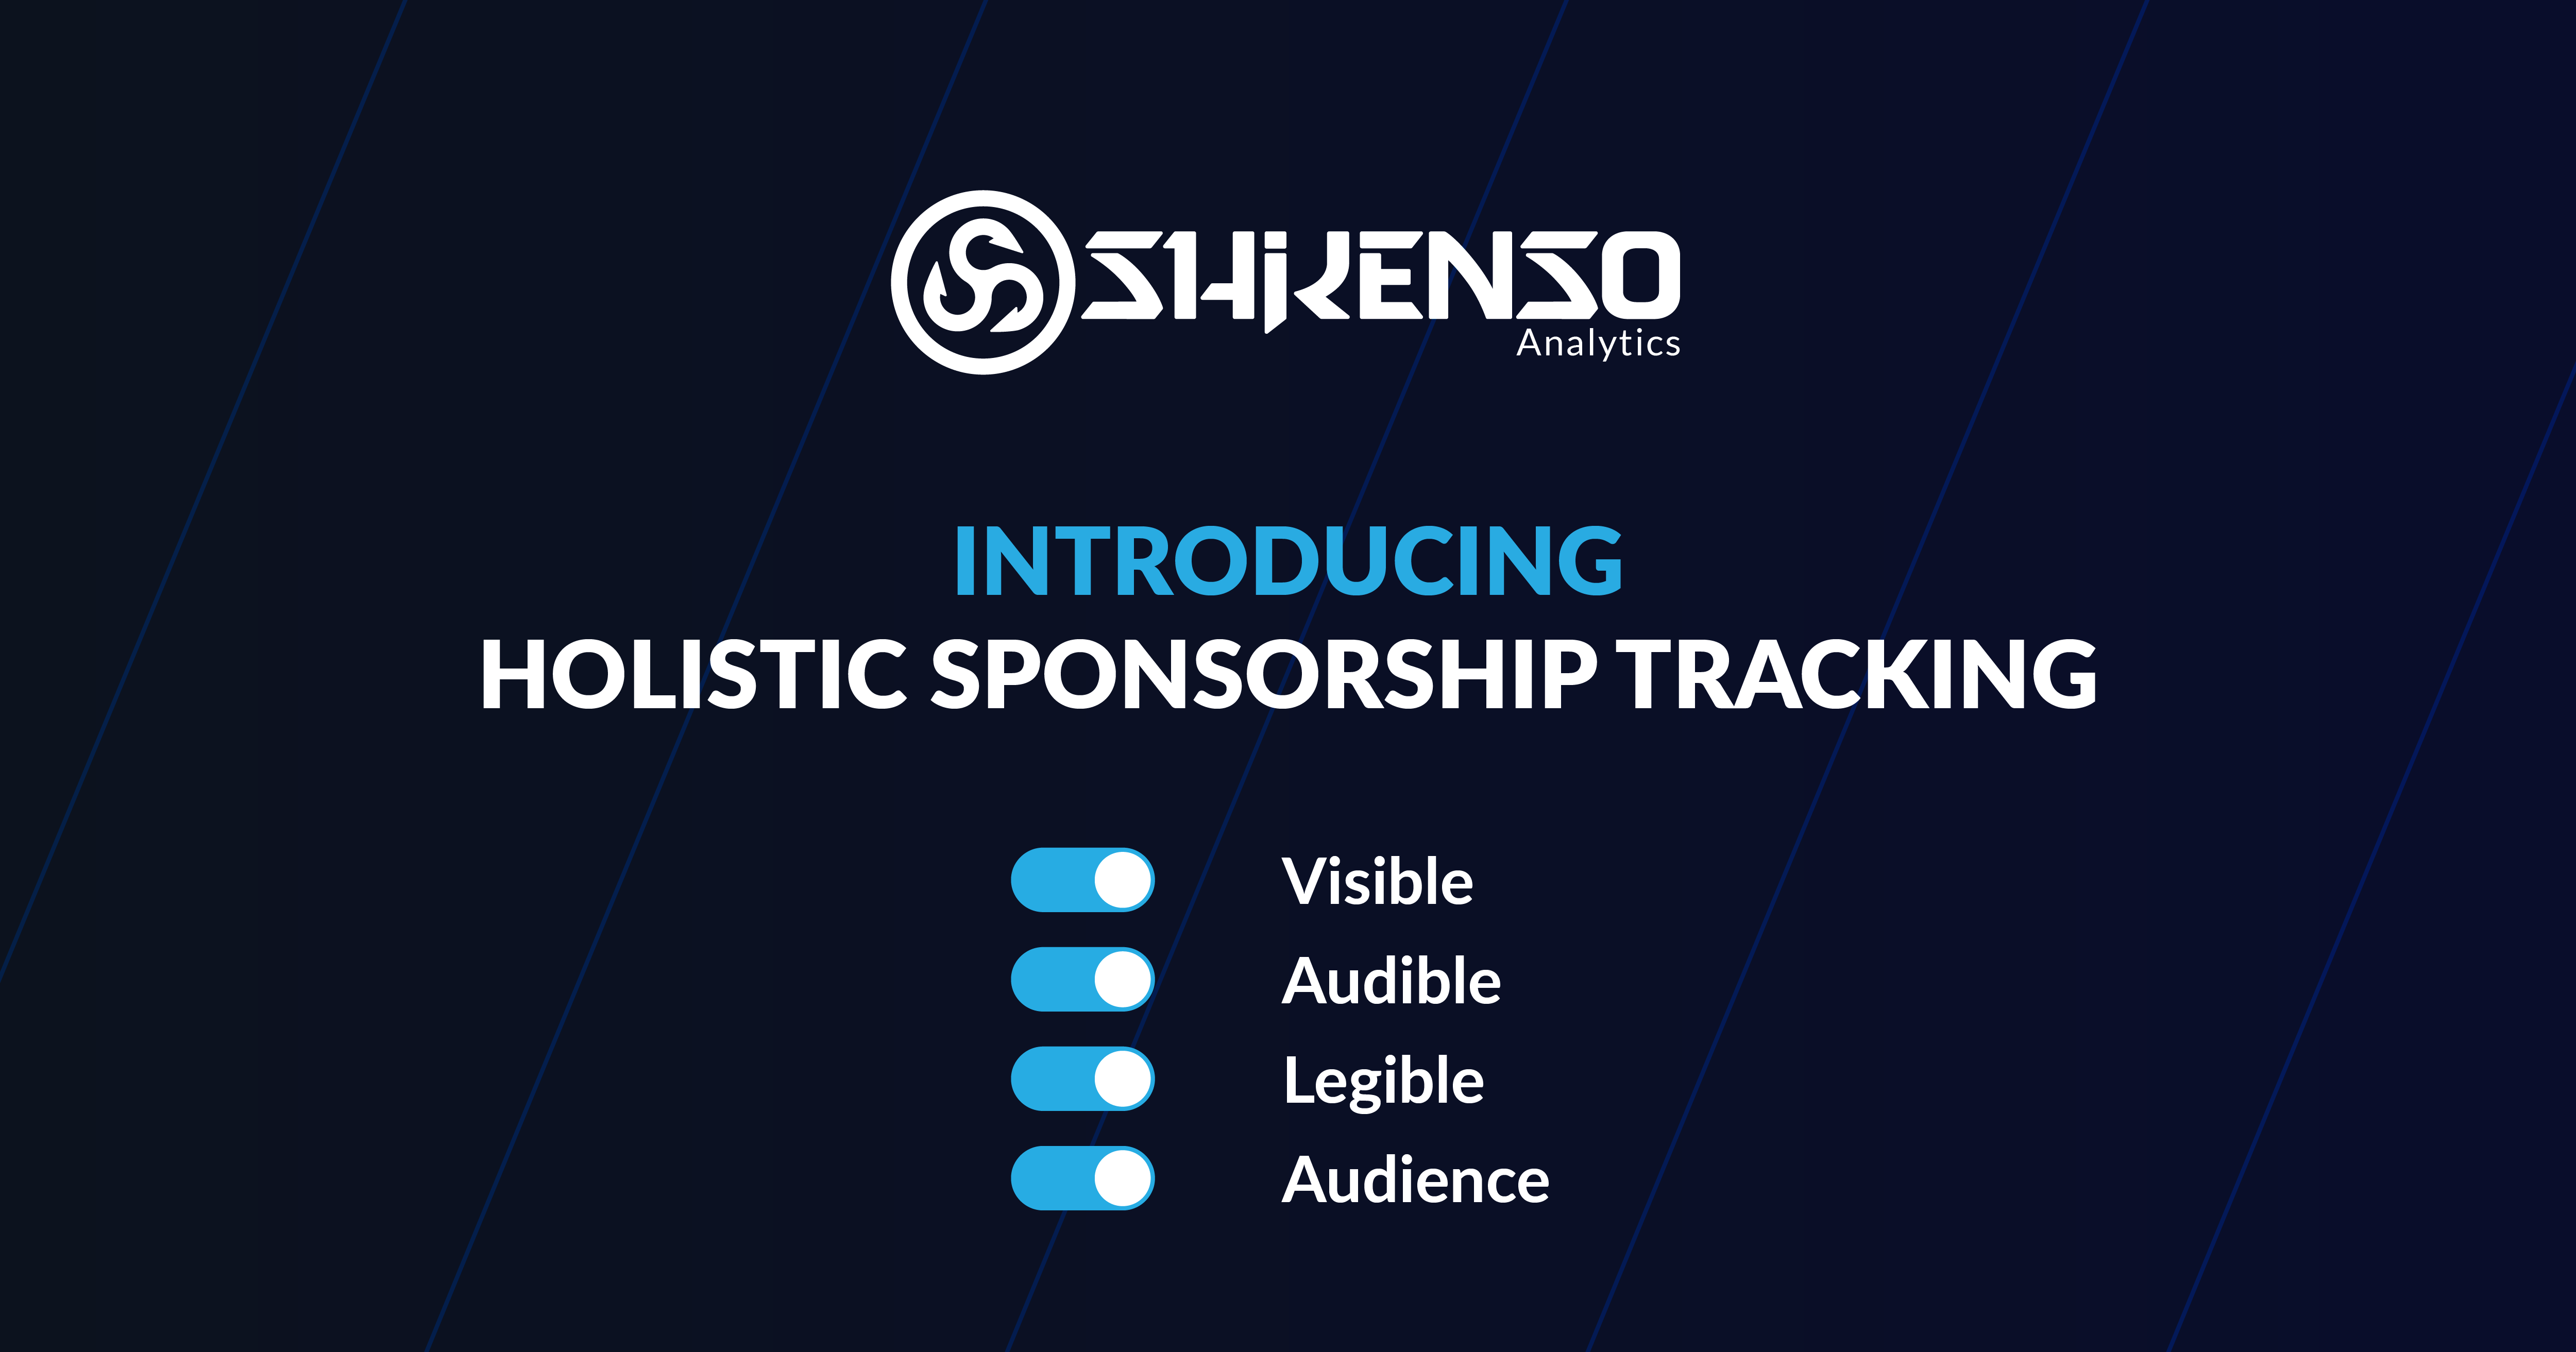 Shikenso Analytics Introduces Holsitic Sponsotship Tracking  Approach: Measurement of Visible, Audible, Legible Exposure & Audience Analysis